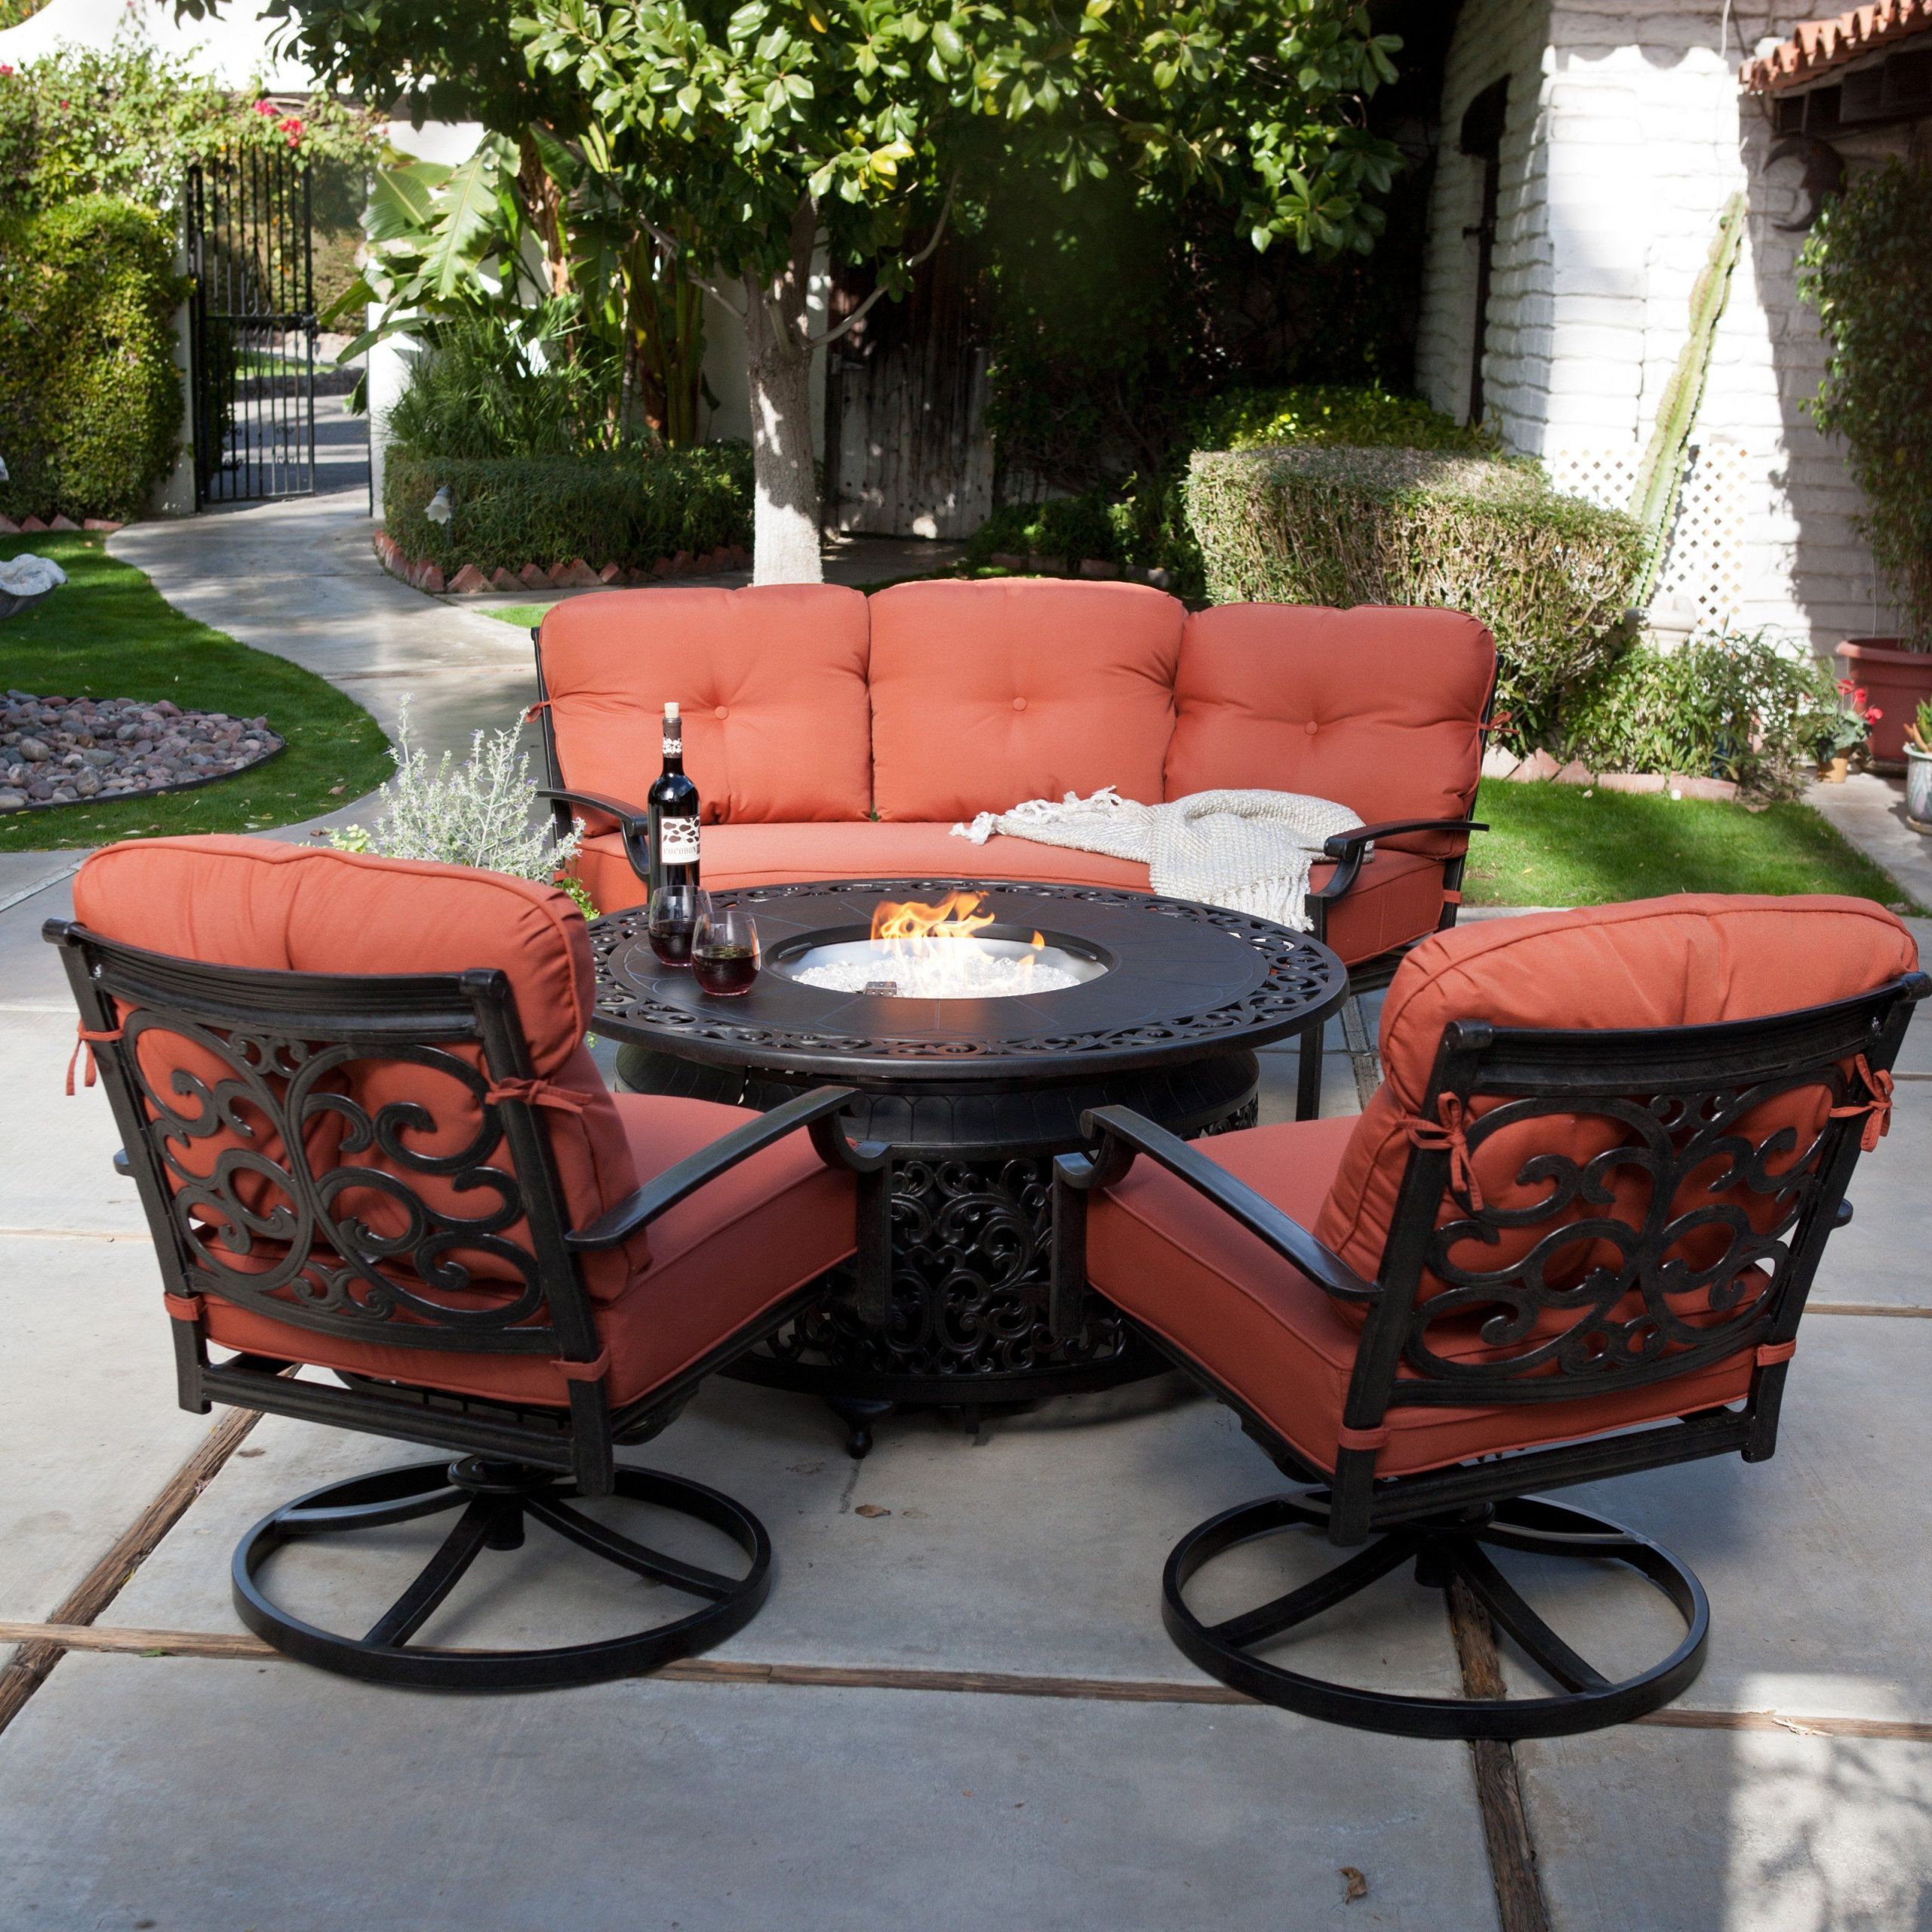 Outdoor Patio Fire Pits & Chat Sets Belham living winston savoy aluminum sling fire pit chat set